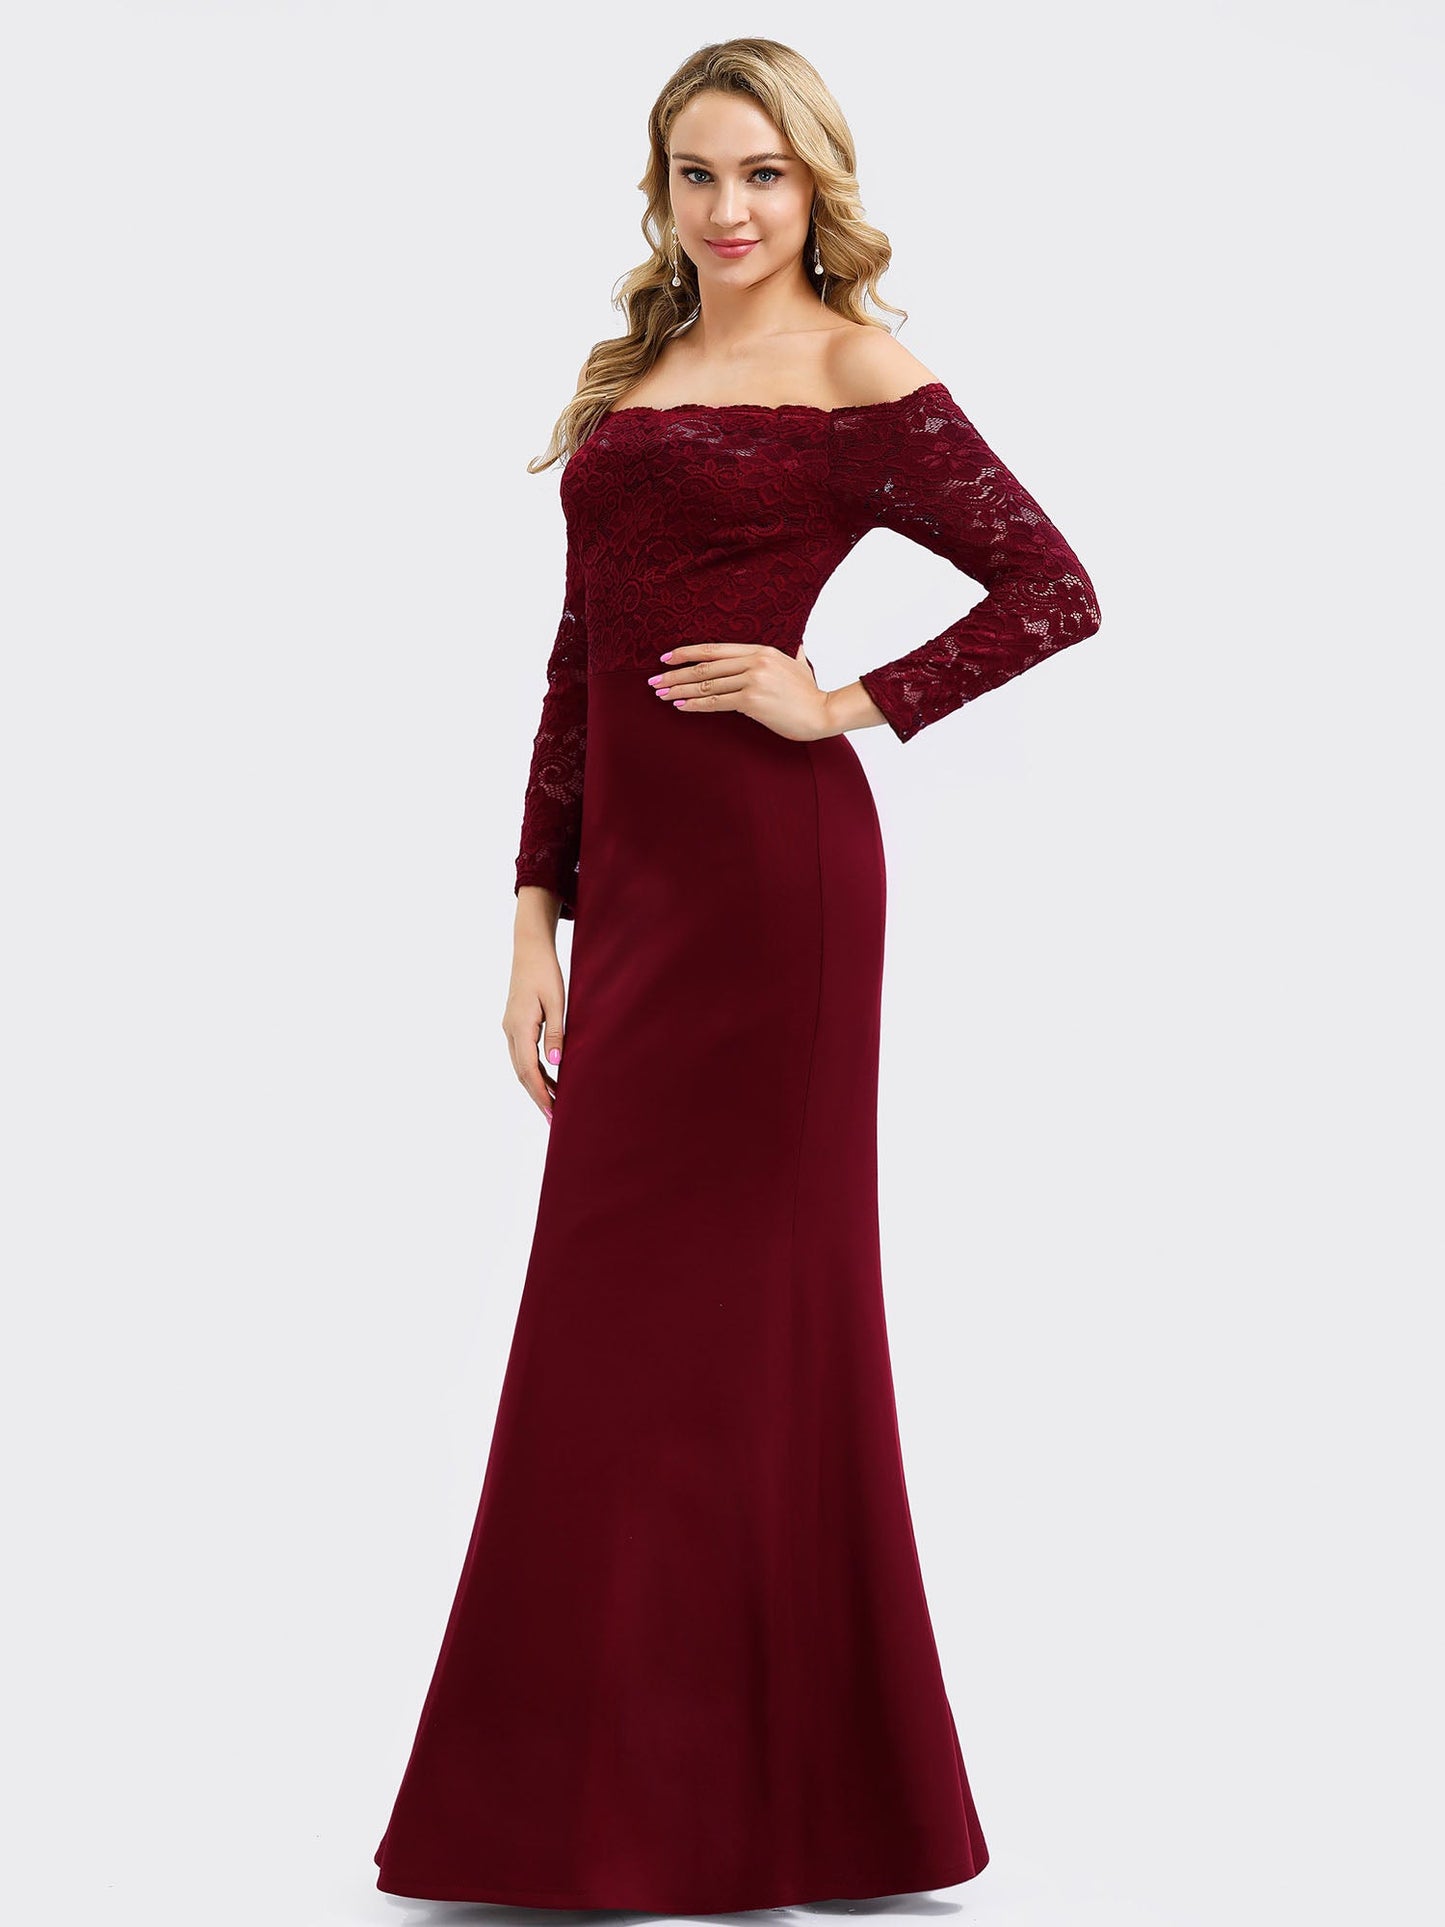 Elegant Off Shoulder Mermaid Wholesale Evening Dress with Lace Sleeves